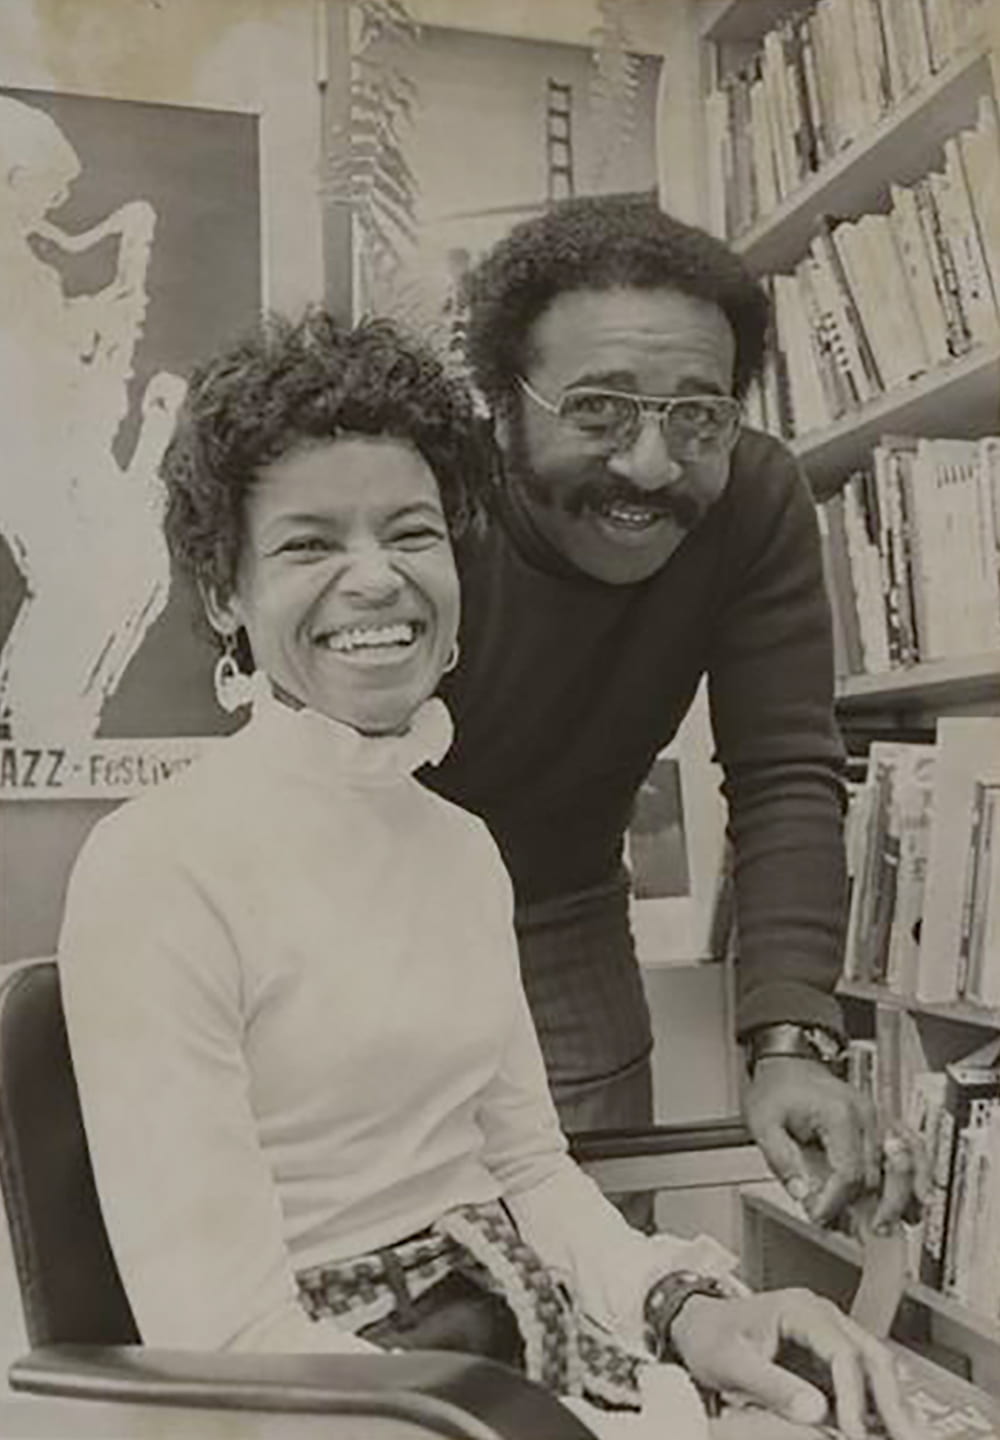 Professor Ed Coleman leans over the shoulder of an unknown woman, both are smiling.